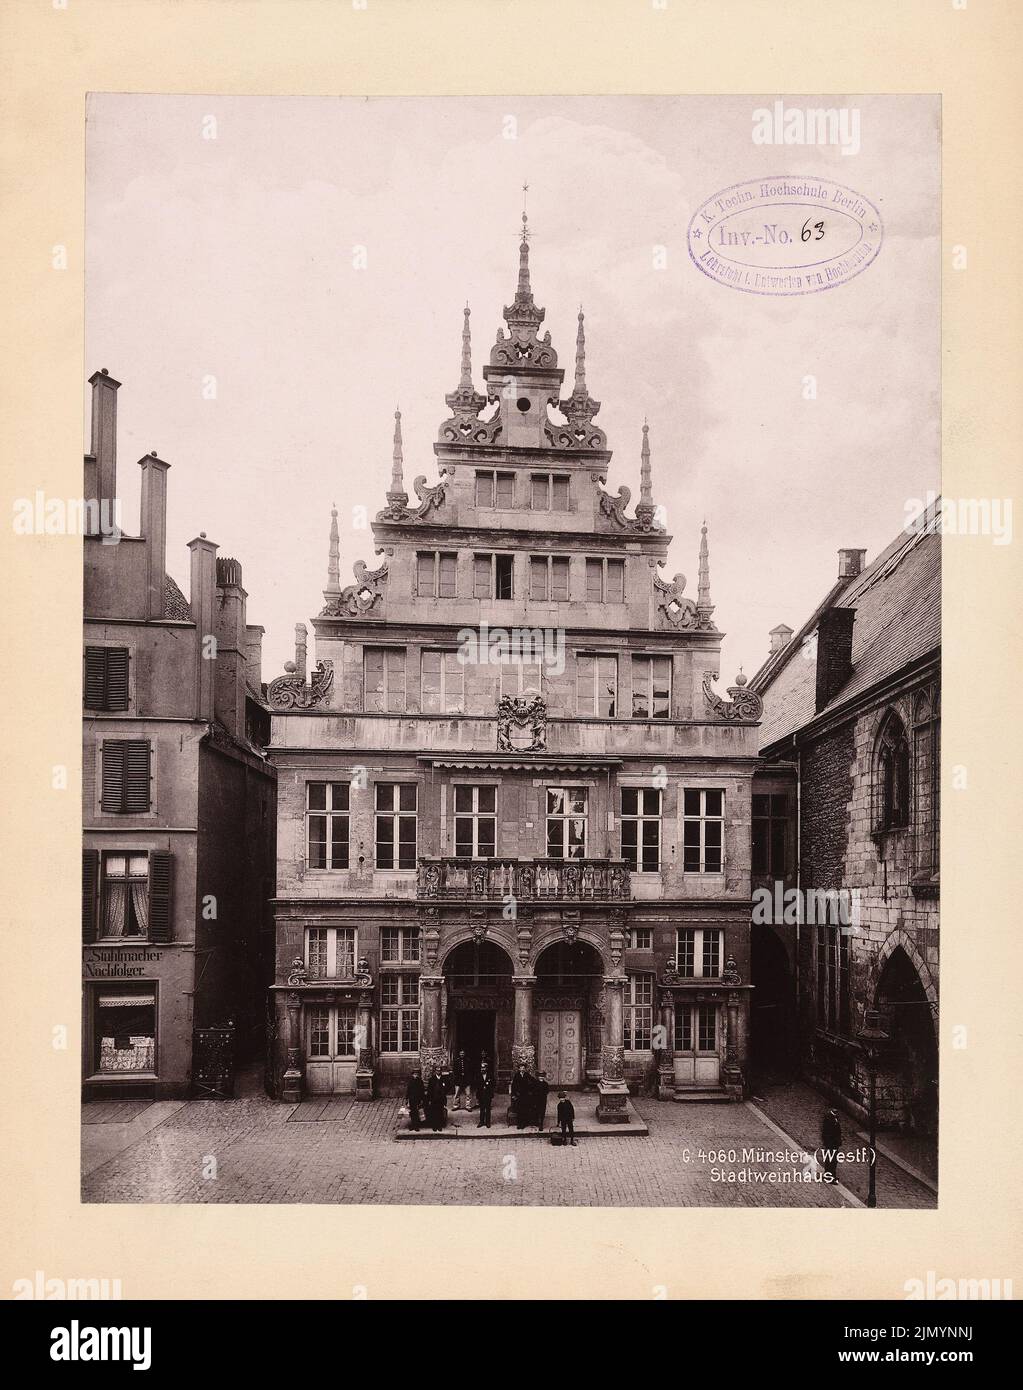 Bocholt Johann von, Stadtweinhaus, Münster (without dat.): Facade of the gable house from 1615/16 (late Renaissance) with column portal and rich figurative ornamentation. Photo, 31.6 x 24.9 cm (including scan edges) Stock Photo